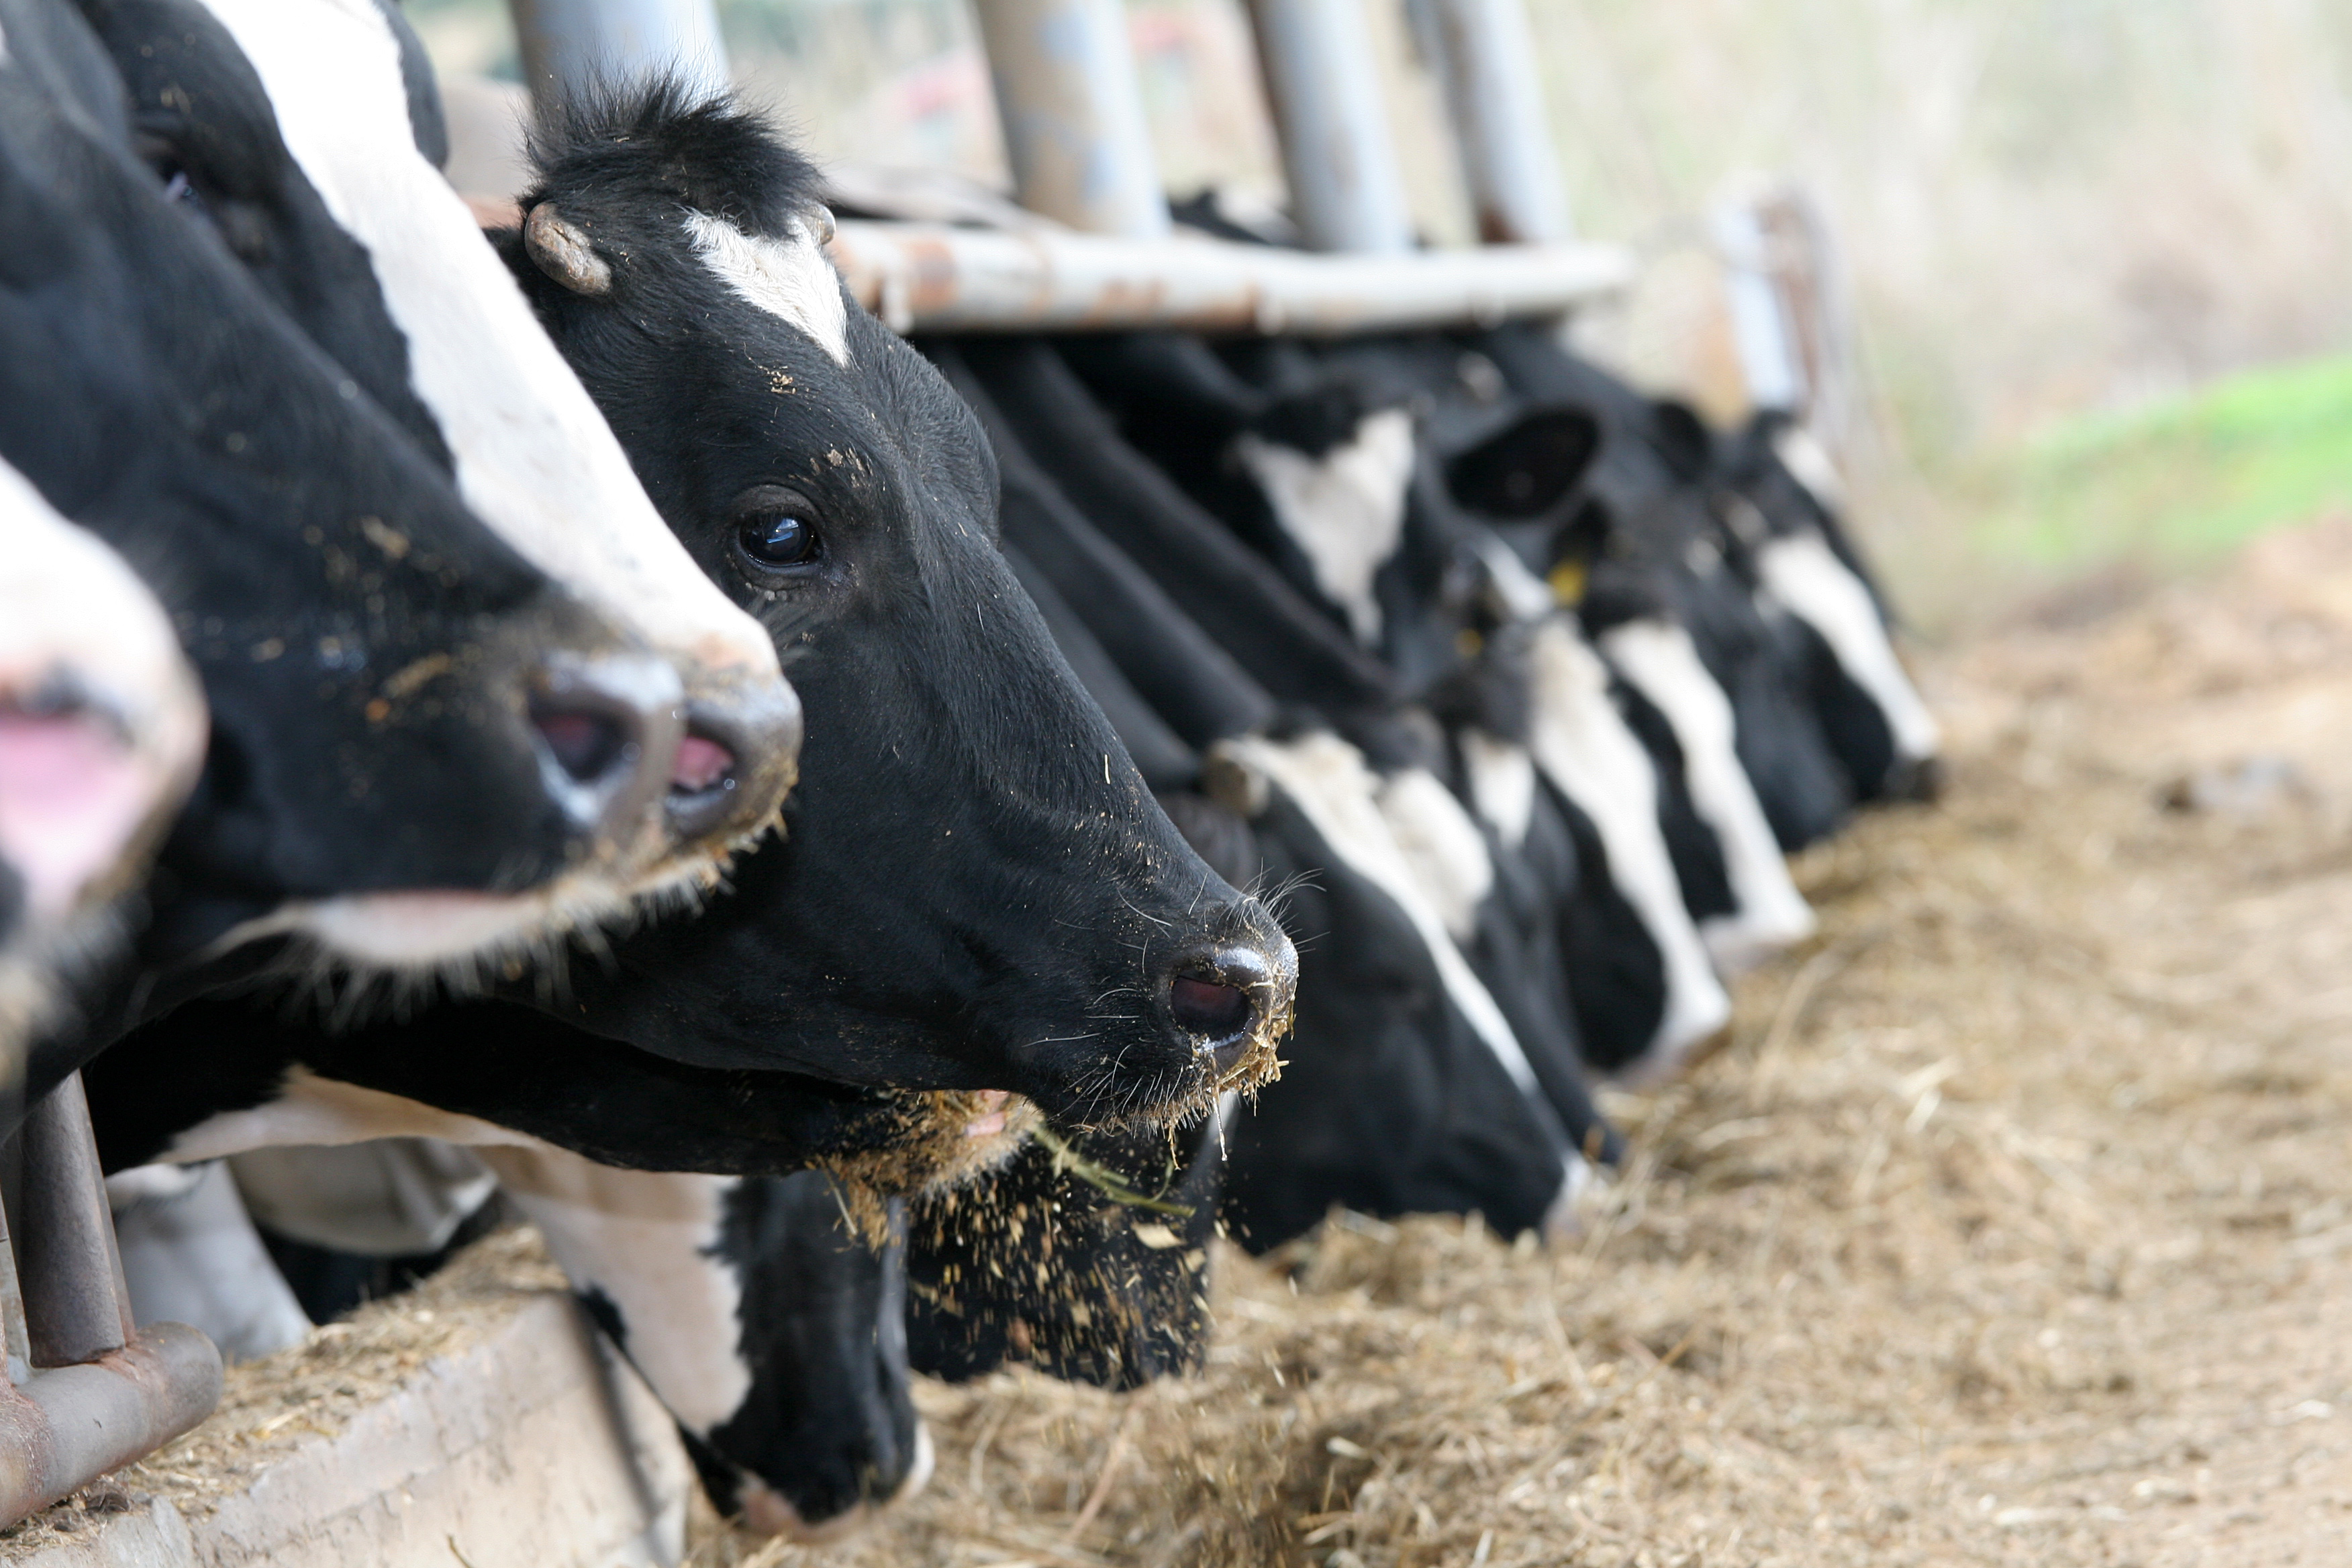 Israeli cows lead the world in milk production